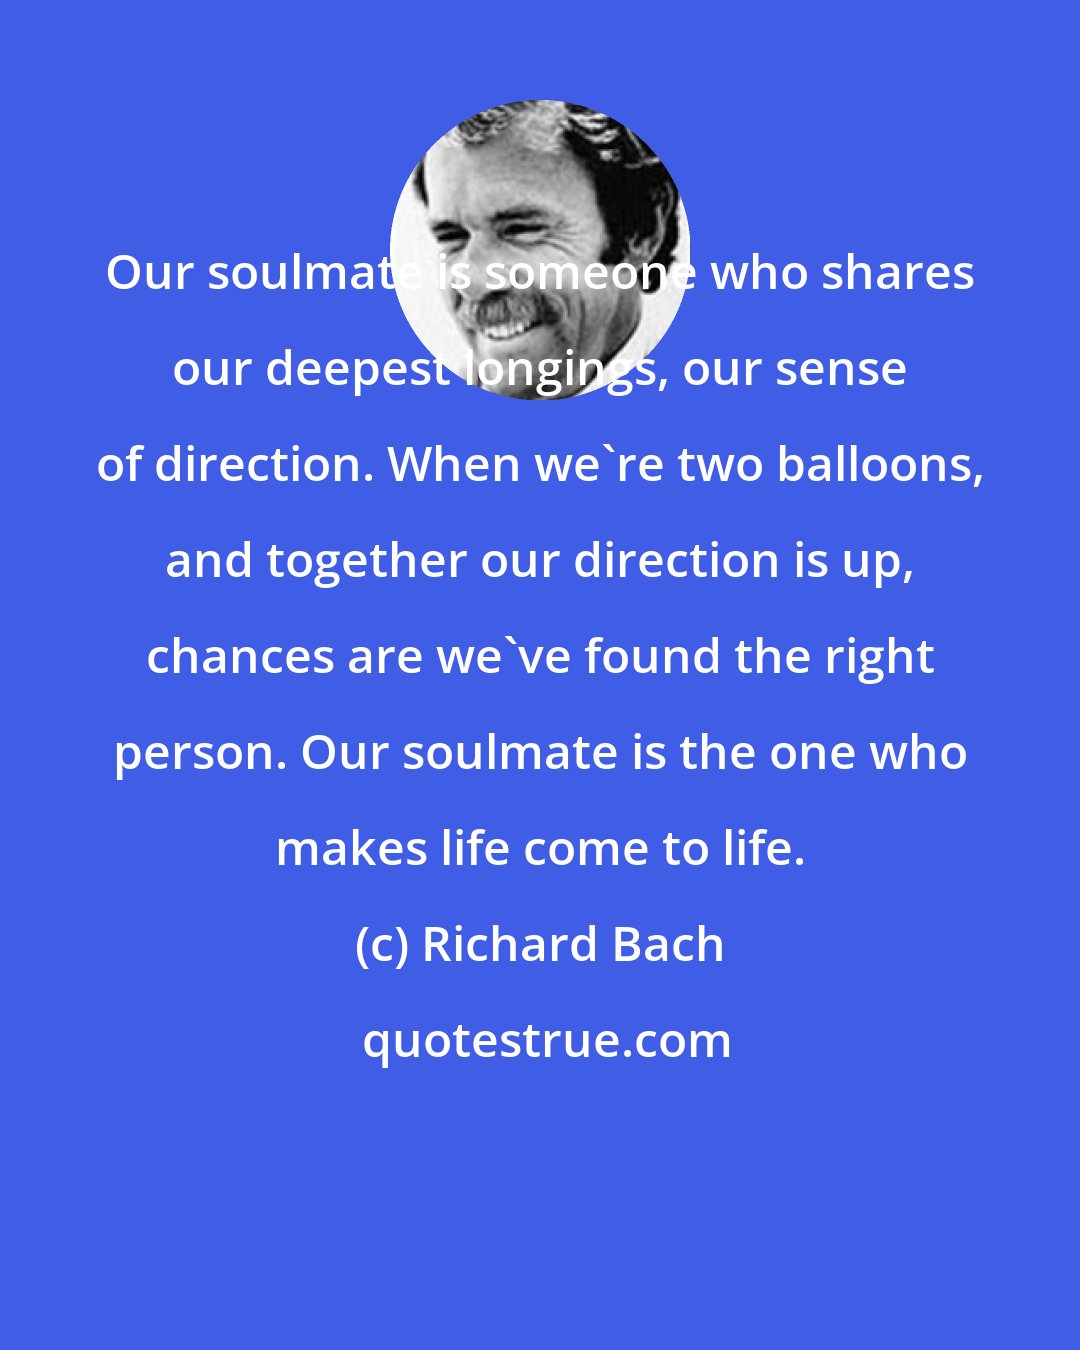 Richard Bach: Our soulmate is someone who shares our deepest longings, our sense of direction. When we're two balloons, and together our direction is up, chances are we've found the right person. Our soulmate is the one who makes life come to life.